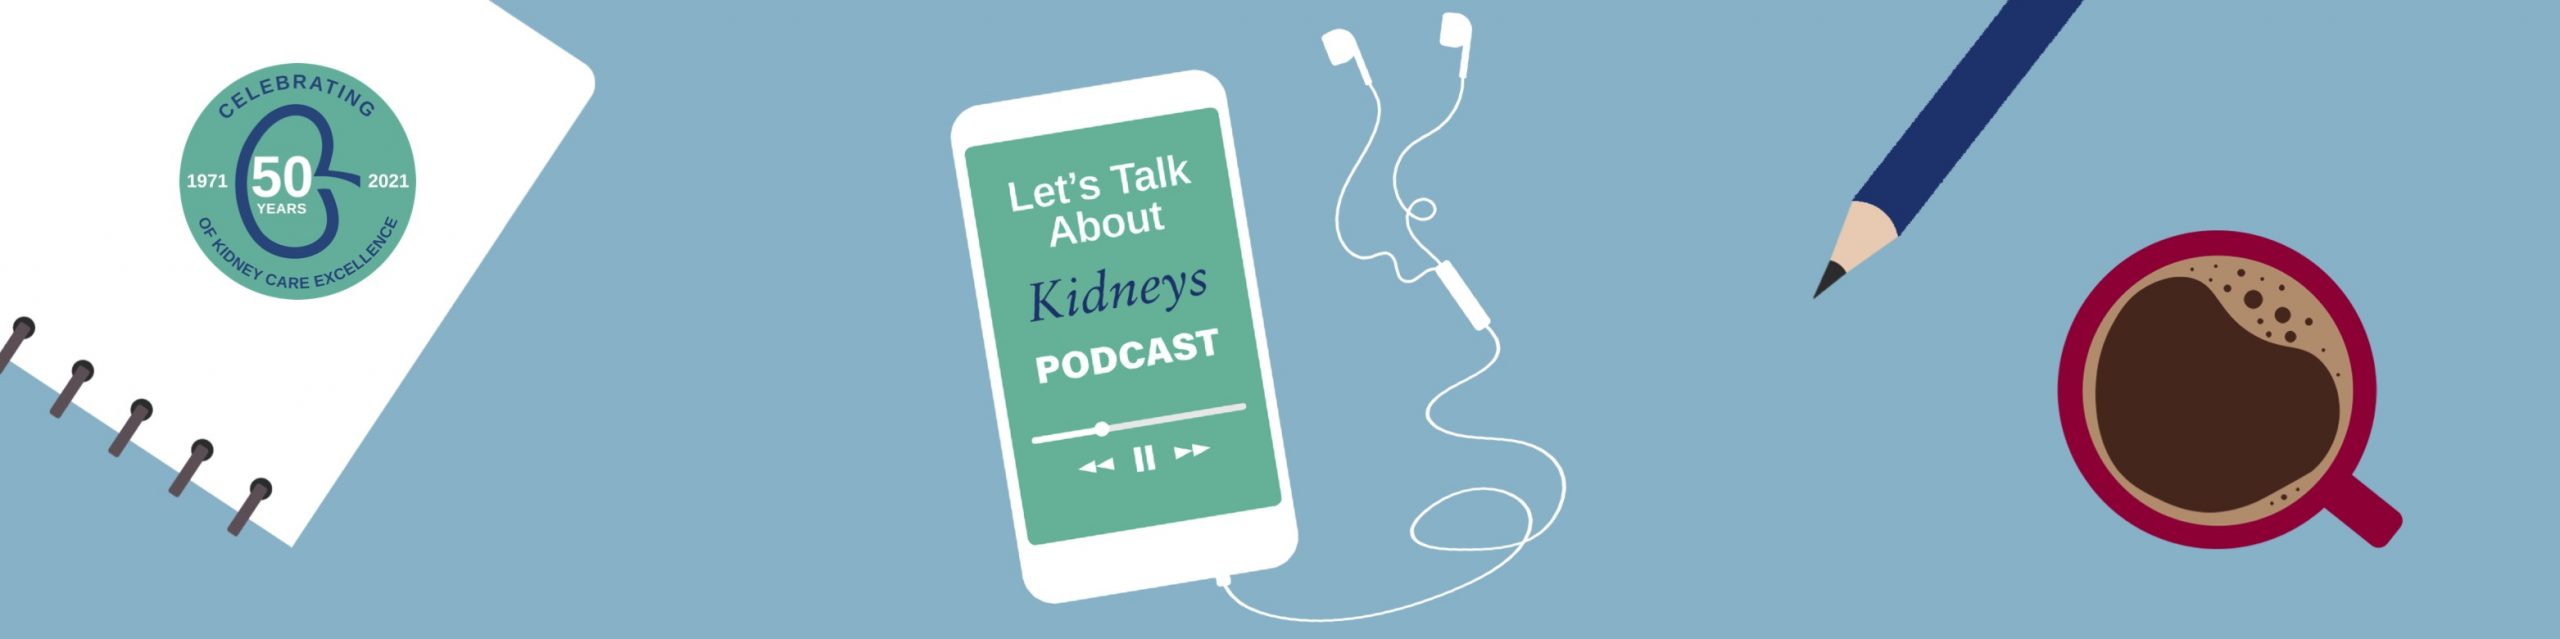 Let's Talk About Kidneys podcast cover image